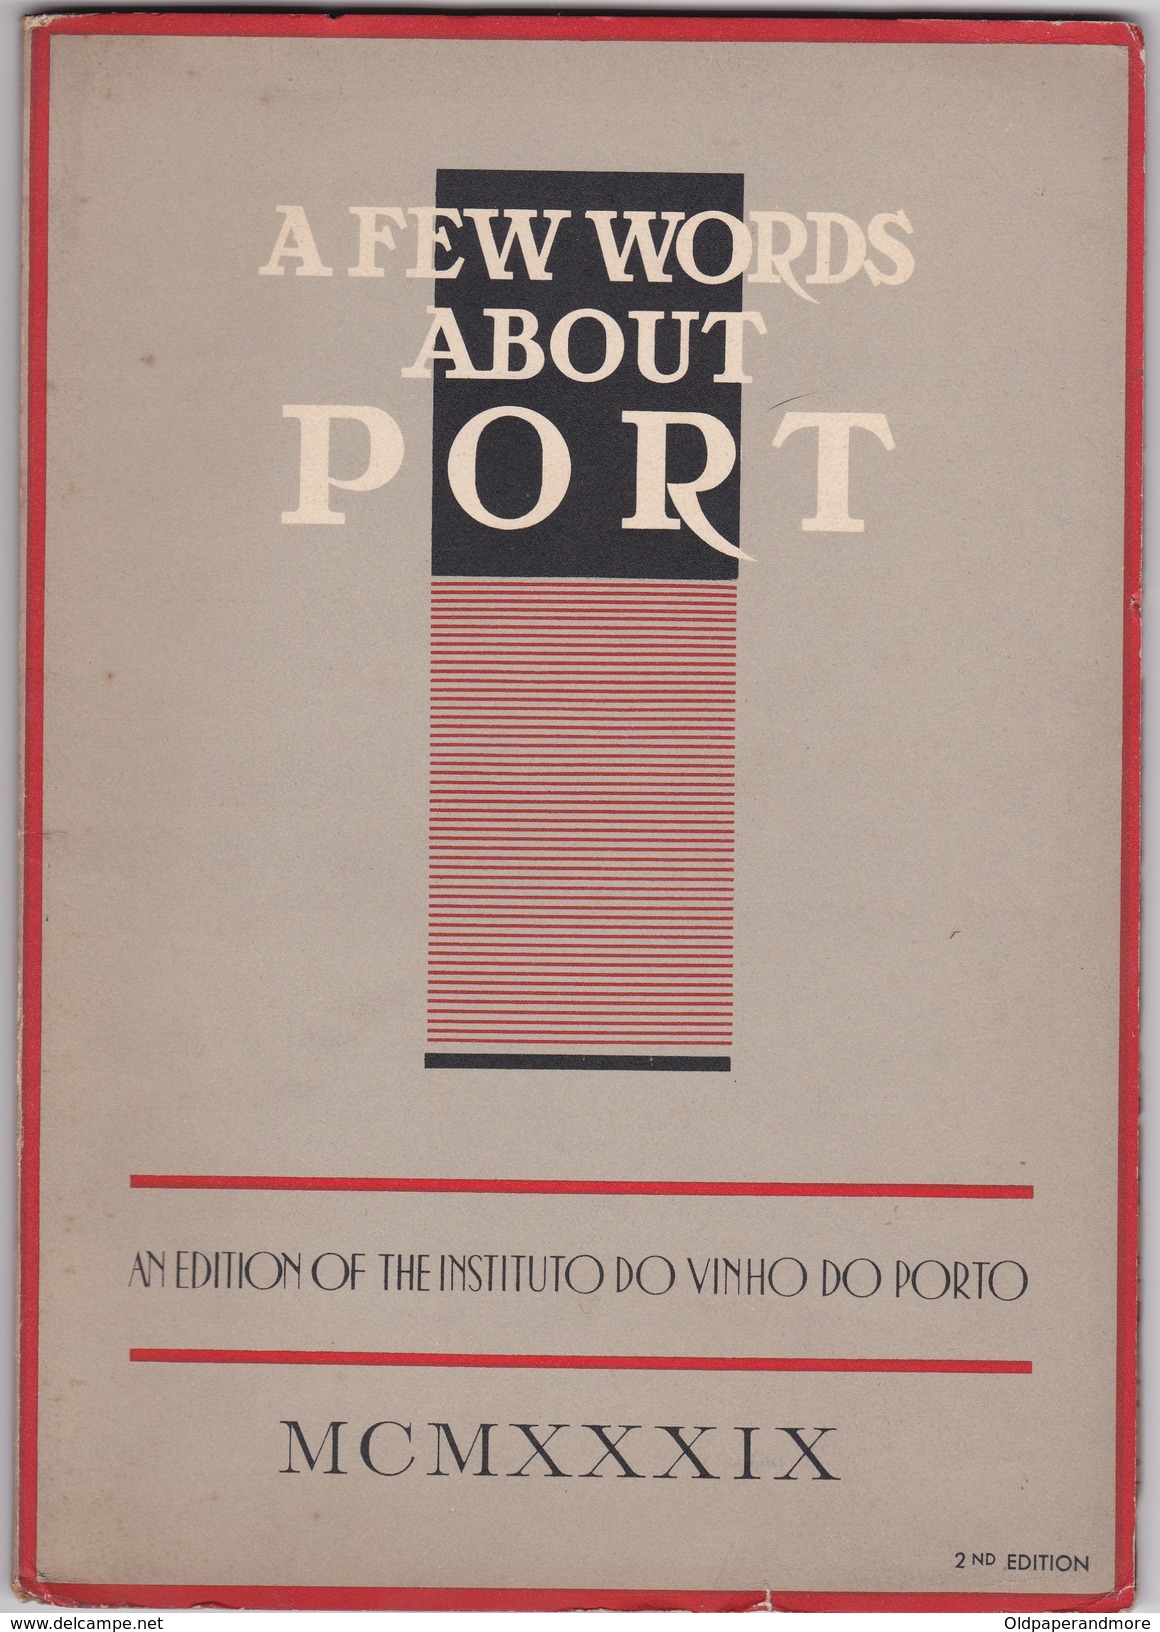 PORTUGAL - A FEW WORDS ABOUT PORT - AN EDITION OF THE INSTITUTO DO VINHO DO PORTO 1939 - WINE - VINO - 2nd EDITION - Europea